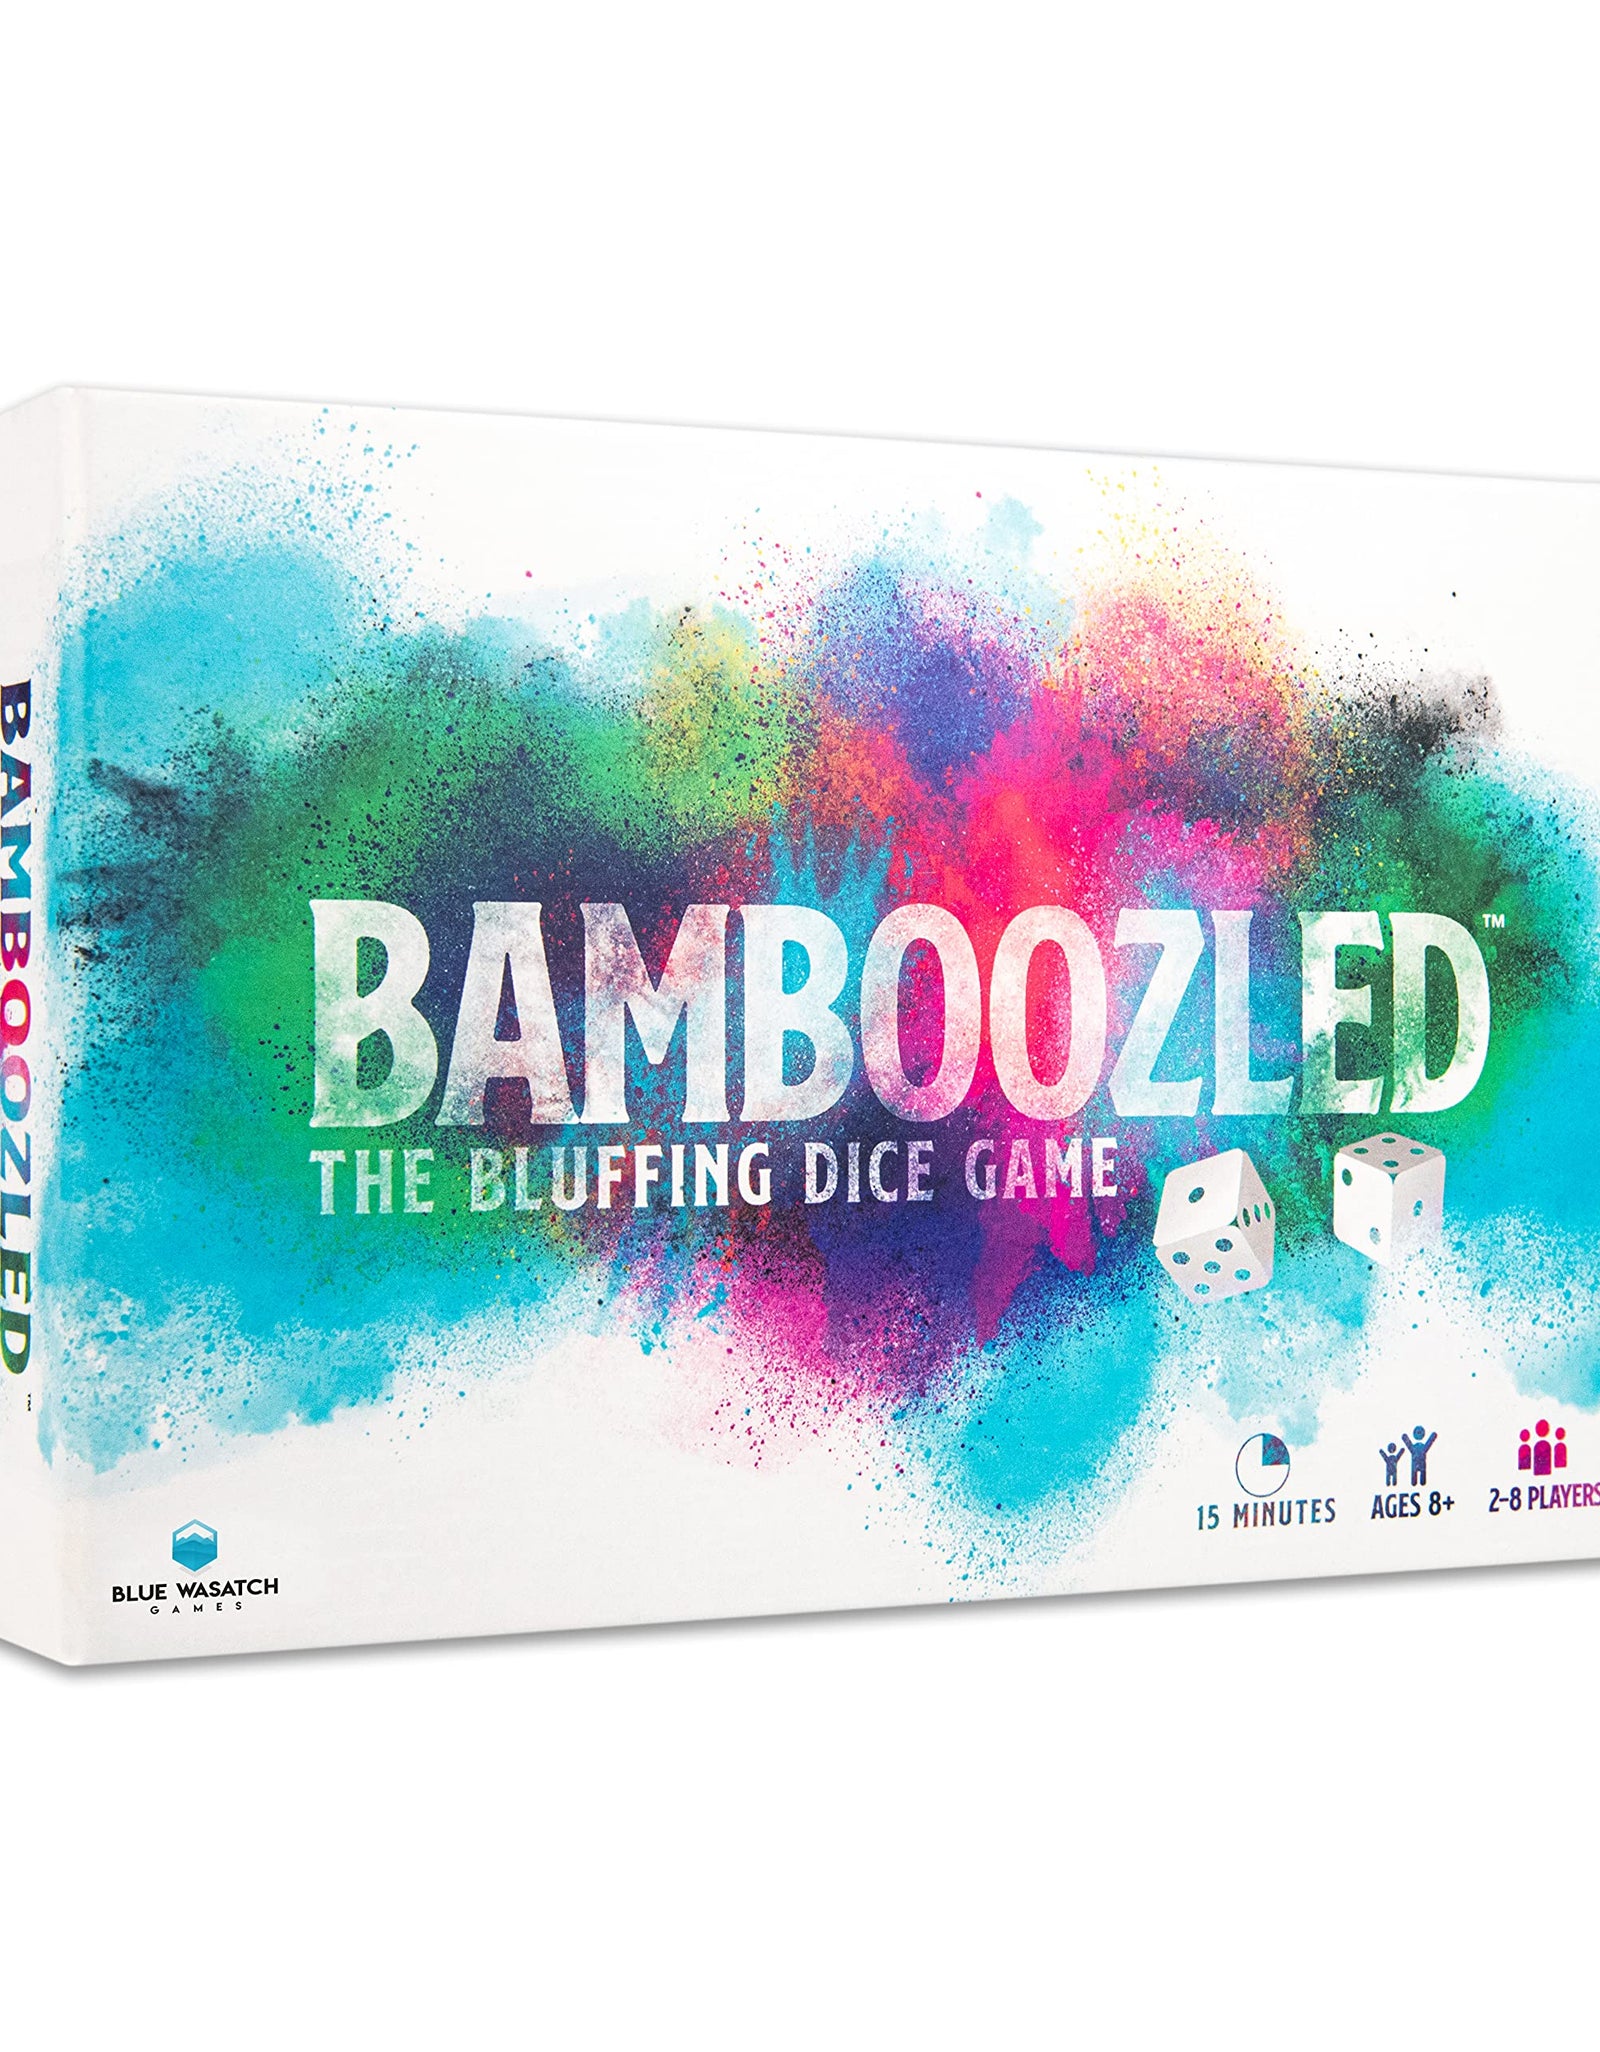 Bamboozled - The Bluffing Dice Game